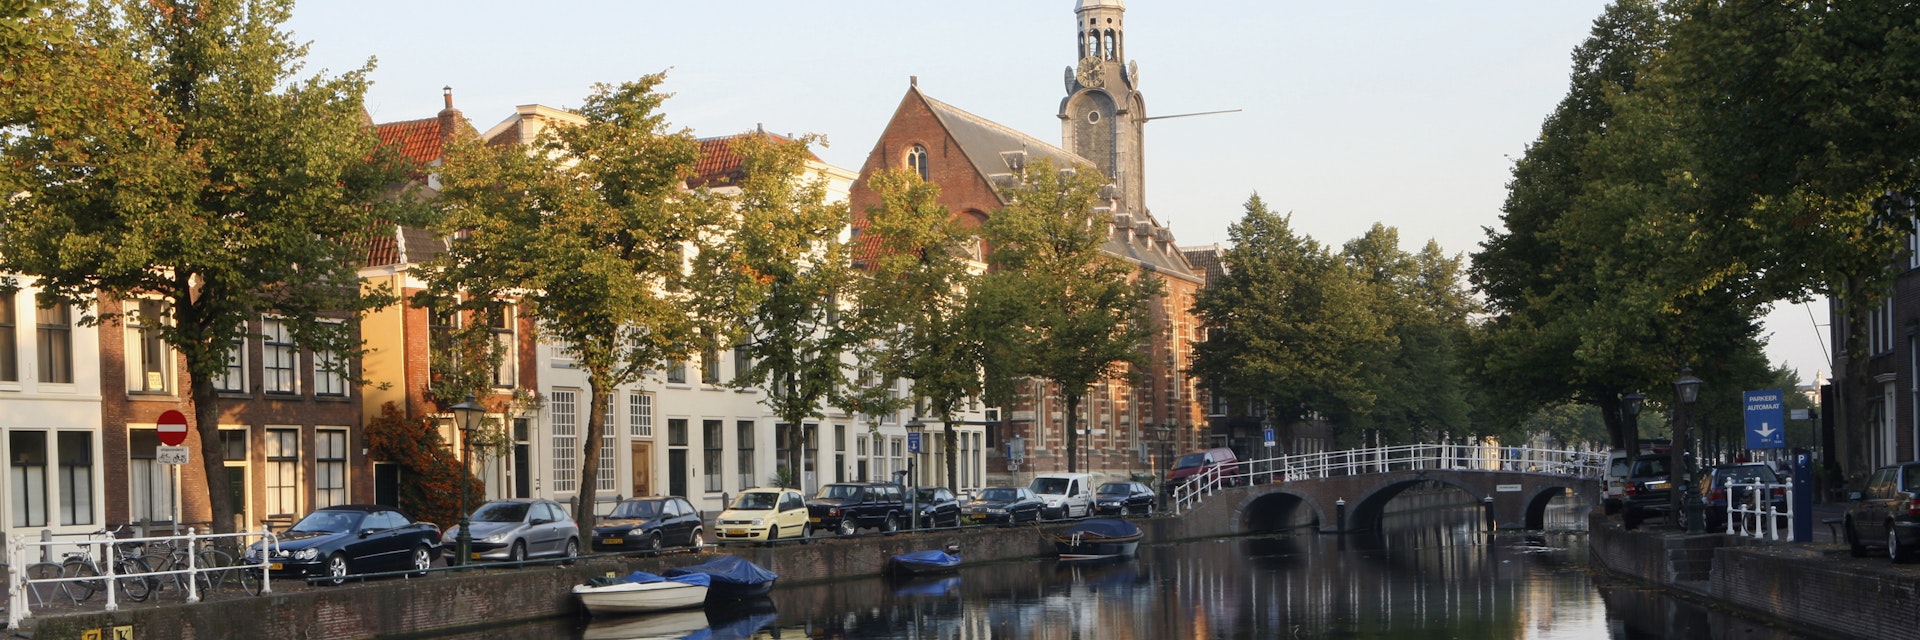 Netherlands, Leiden, view across canal with Leiden university's Academy Building on the right